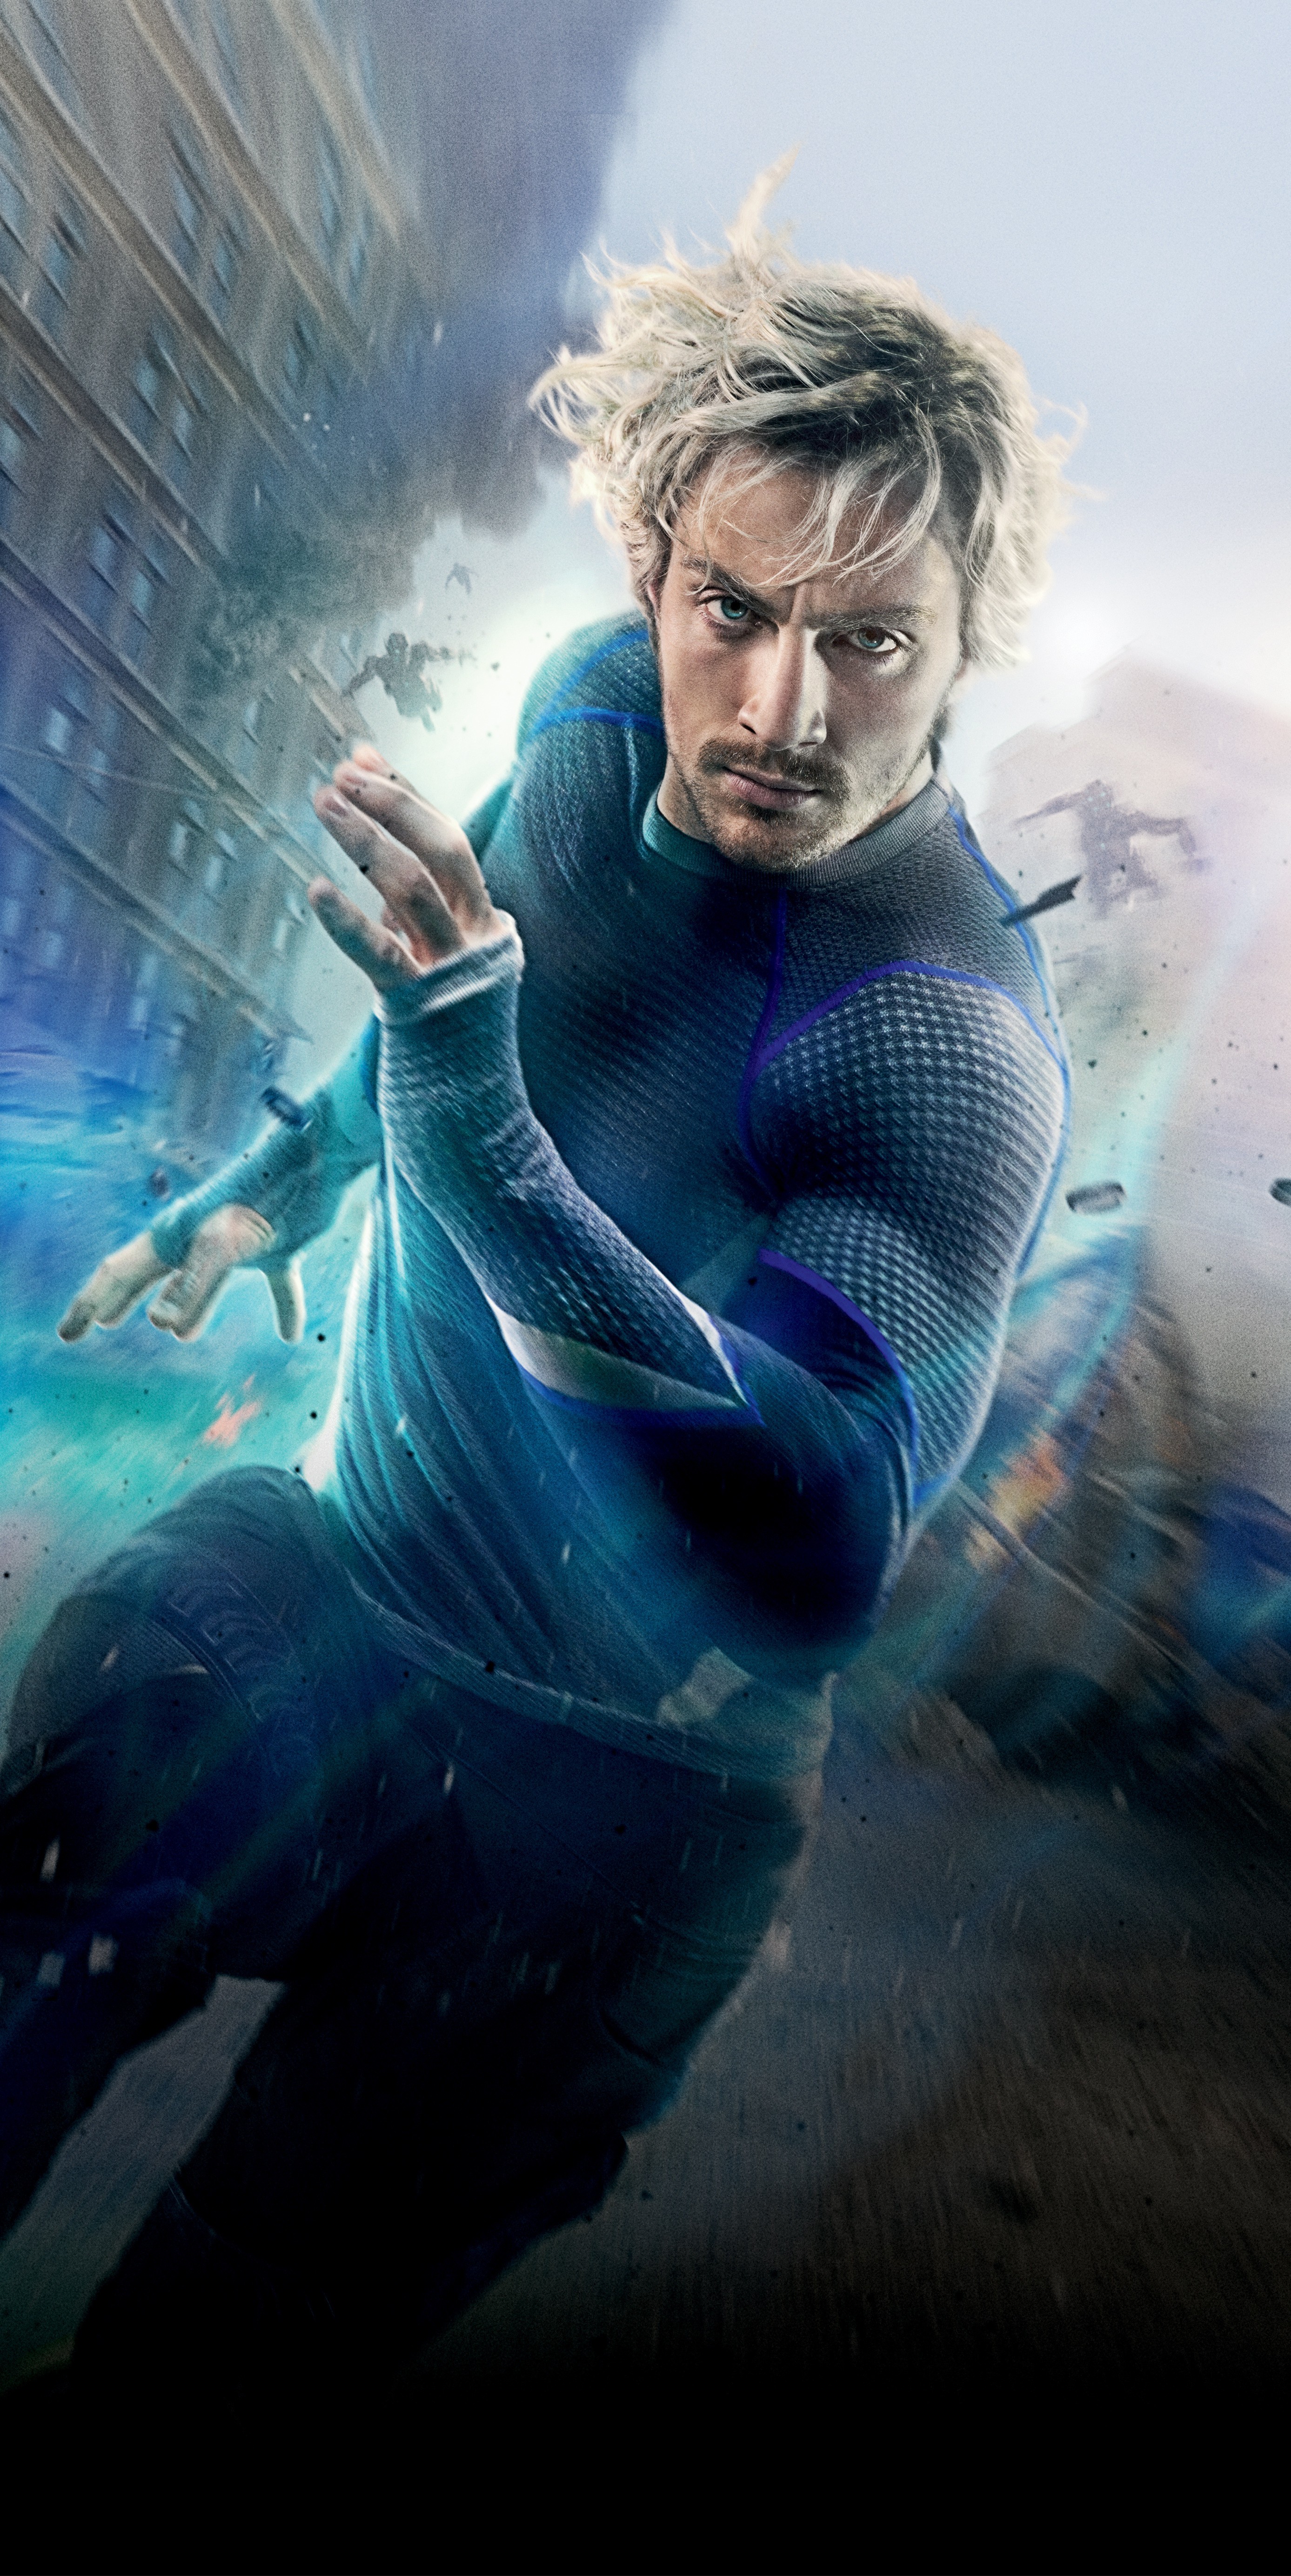 Avengers Age Of Ultron The Avengers Quicksilver Aaron Taylor Johnson Cyan 2775x5537